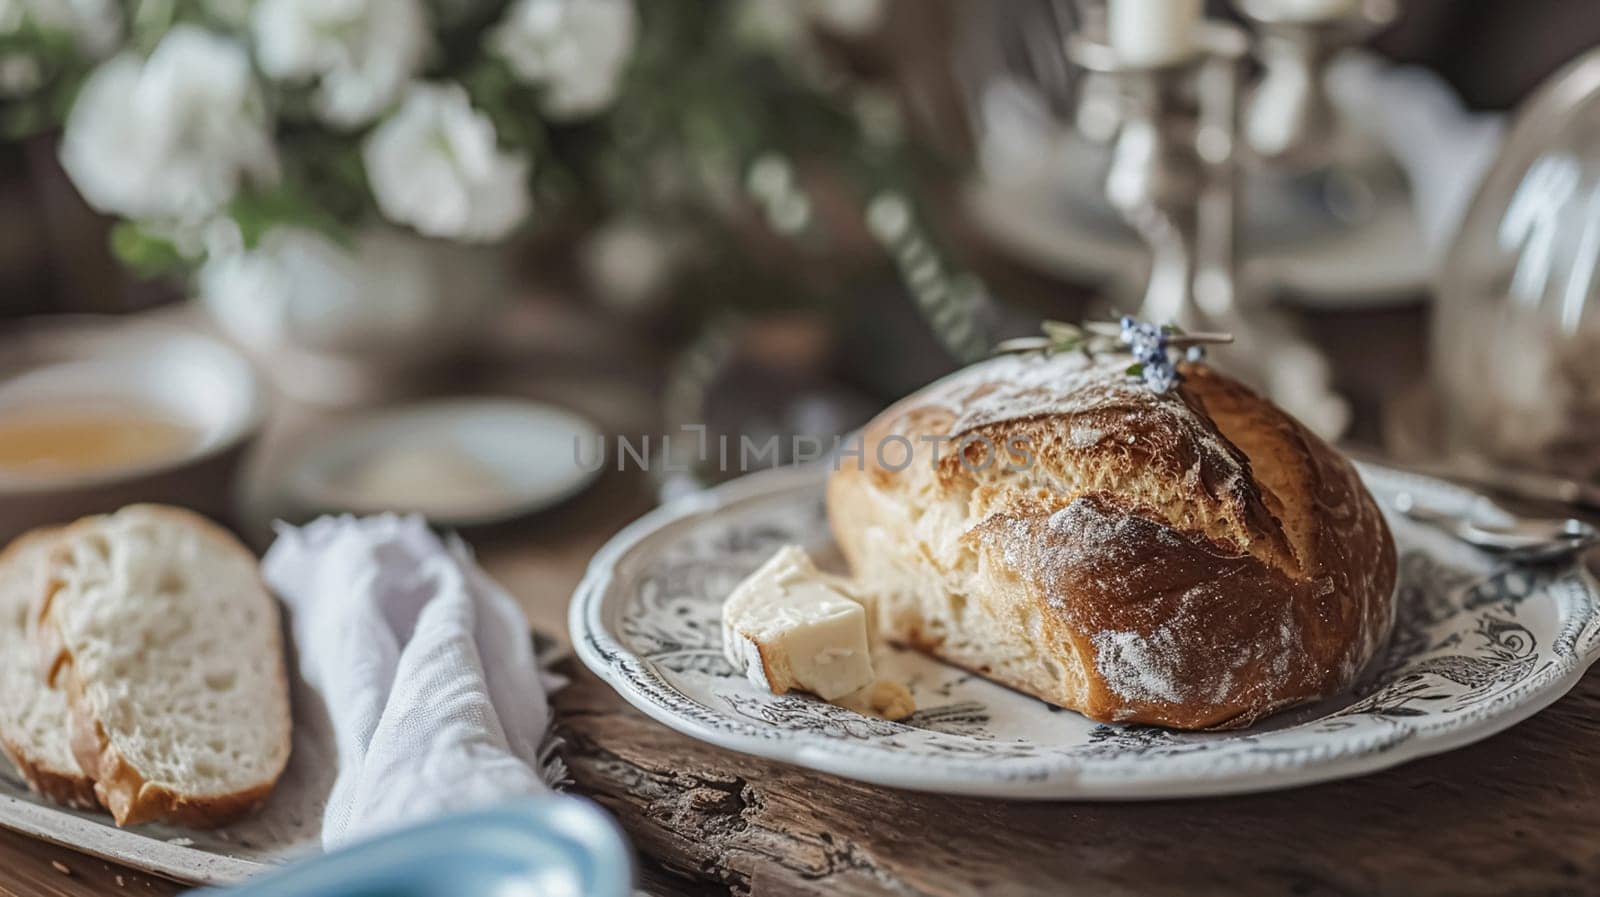 Bread and butter, homemade baking and traditional food, country life